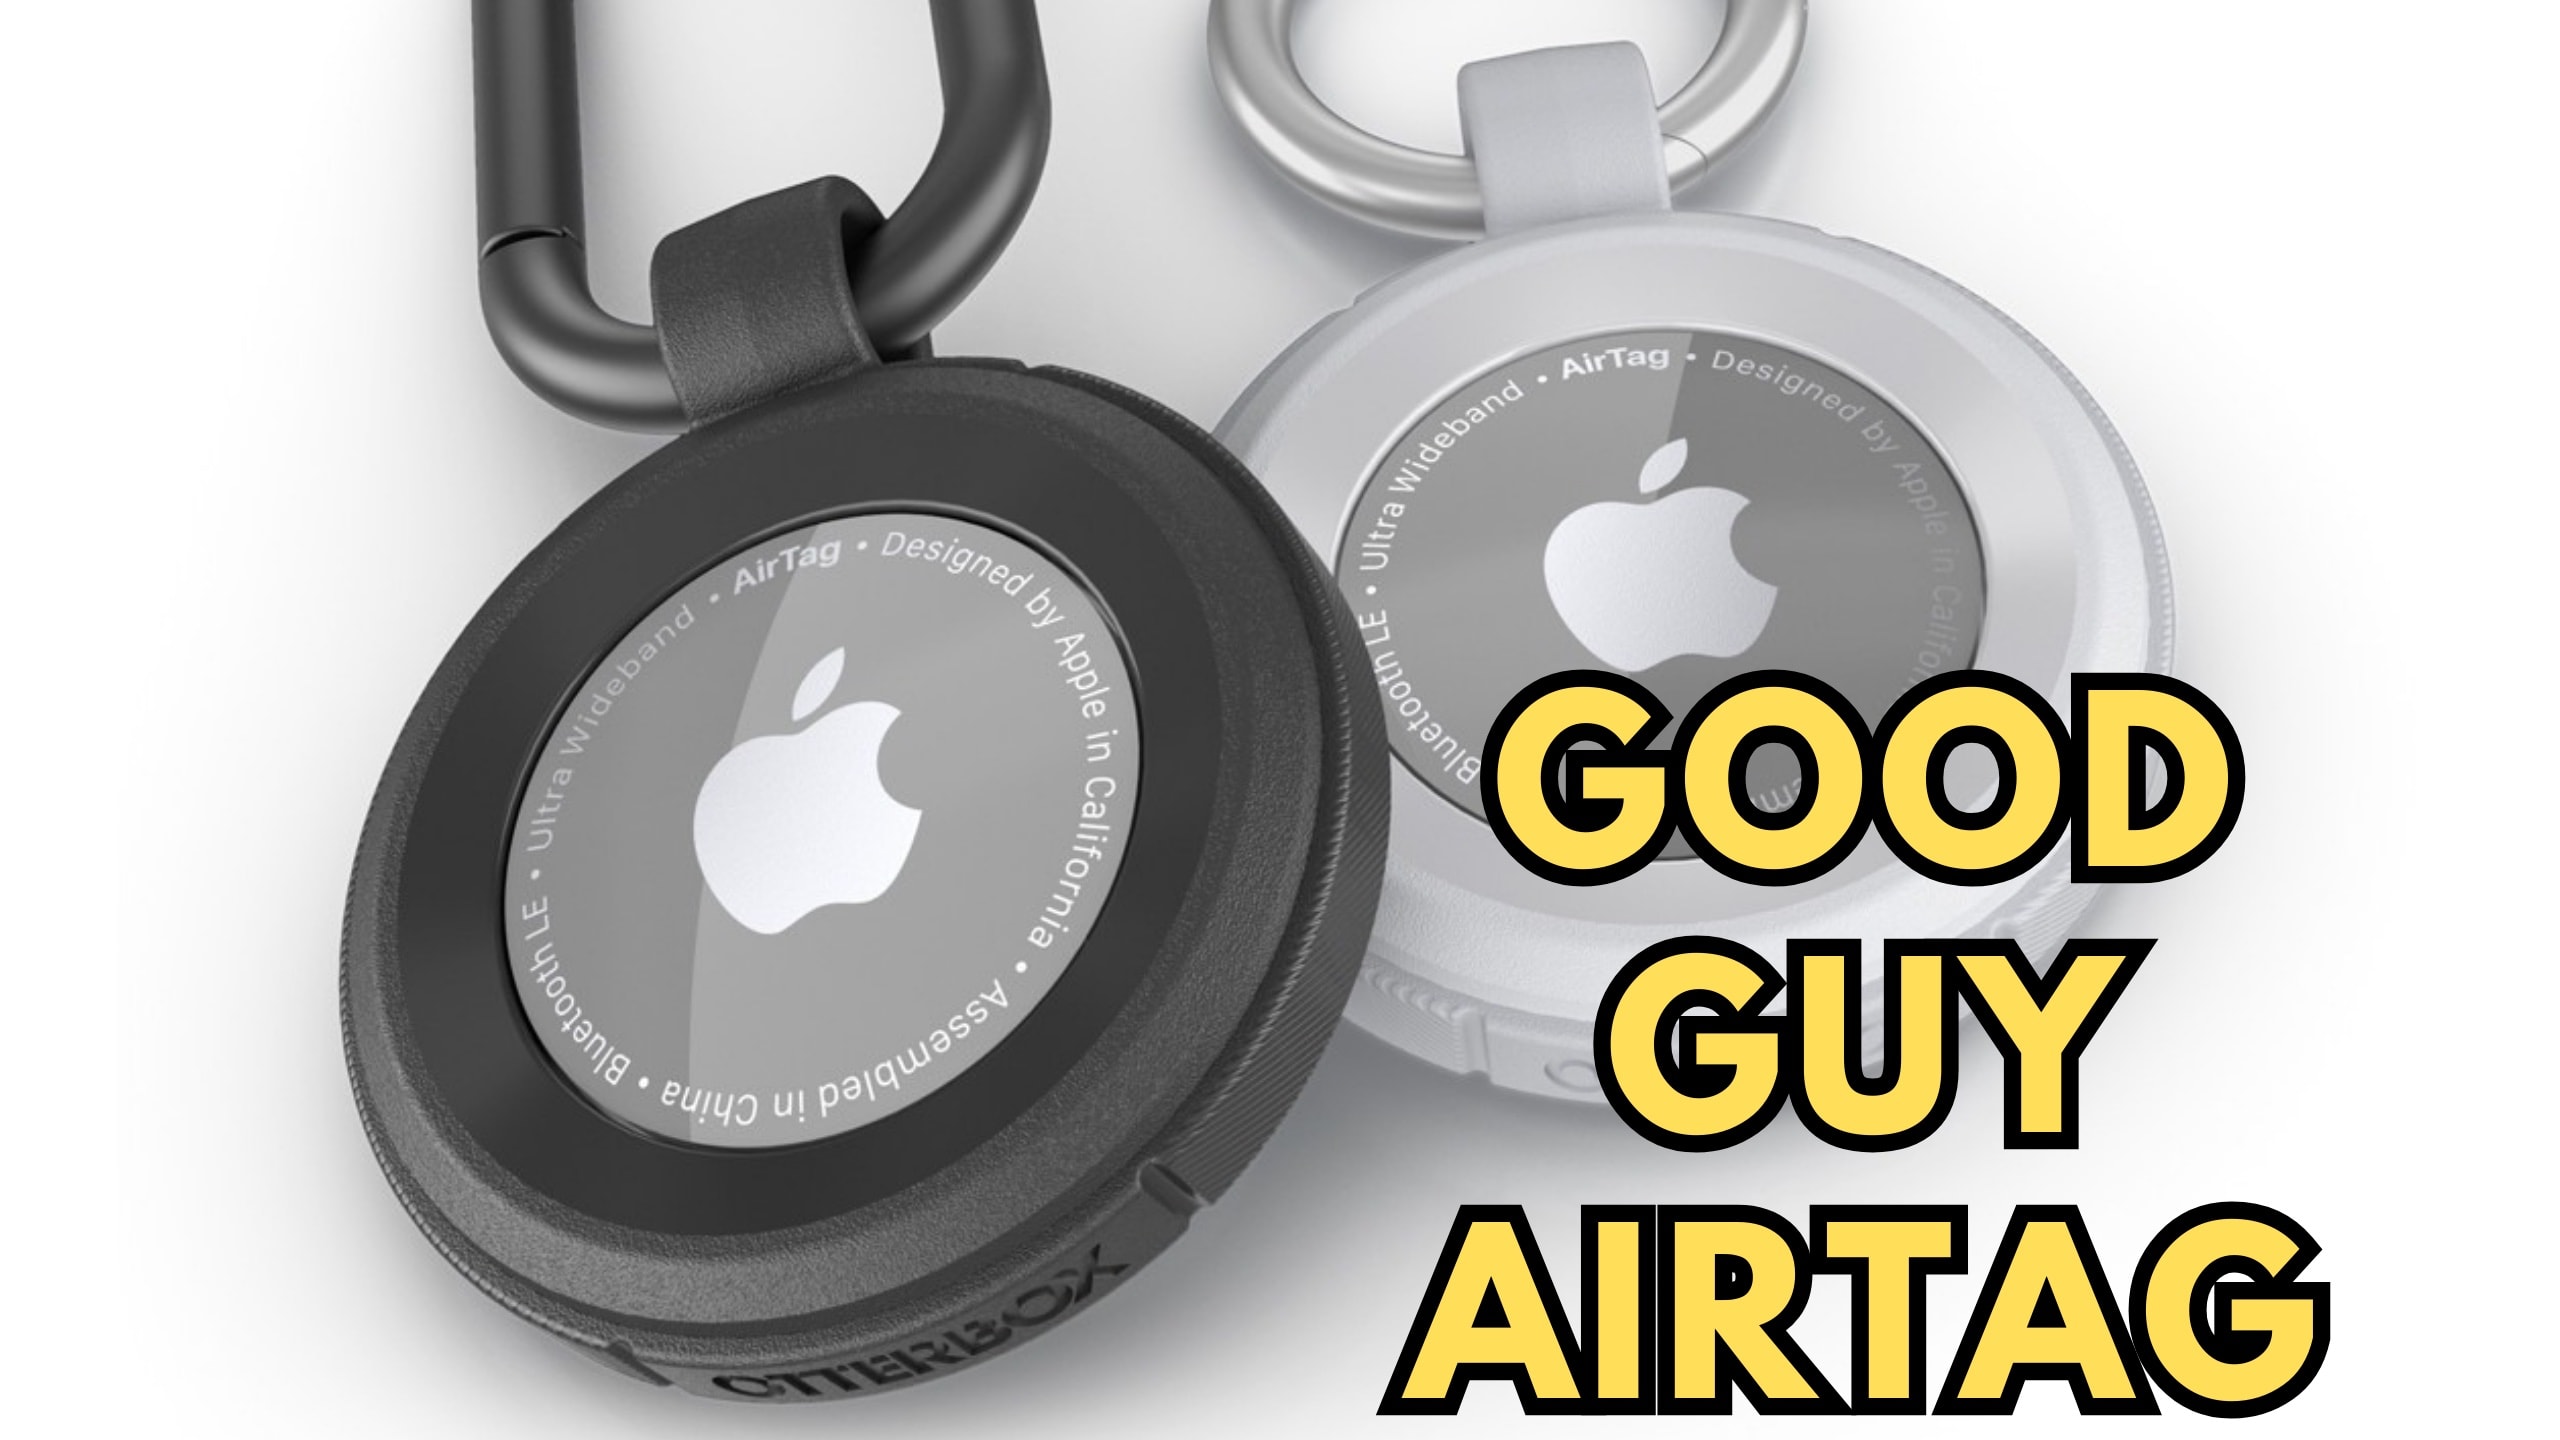 Apple AirTags and car theft: Downside of tracking technology